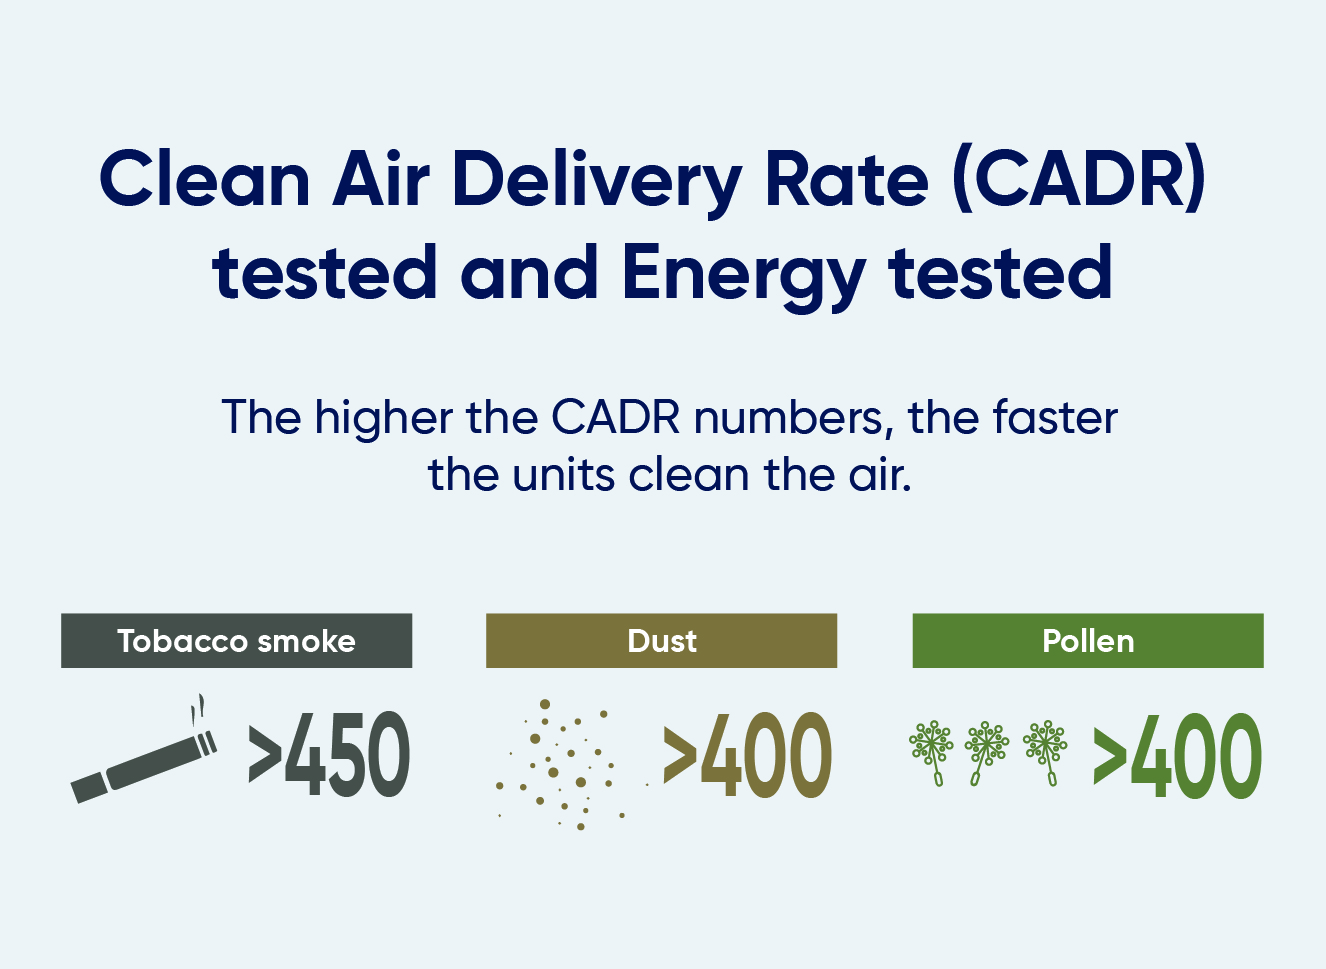 Blueair Info graphic:  Clean air delivery rate tested (CARD) The higher the CADR numbers, the faster the units clean the air. Tobacco smoke > 450, Dust >400, polle >400